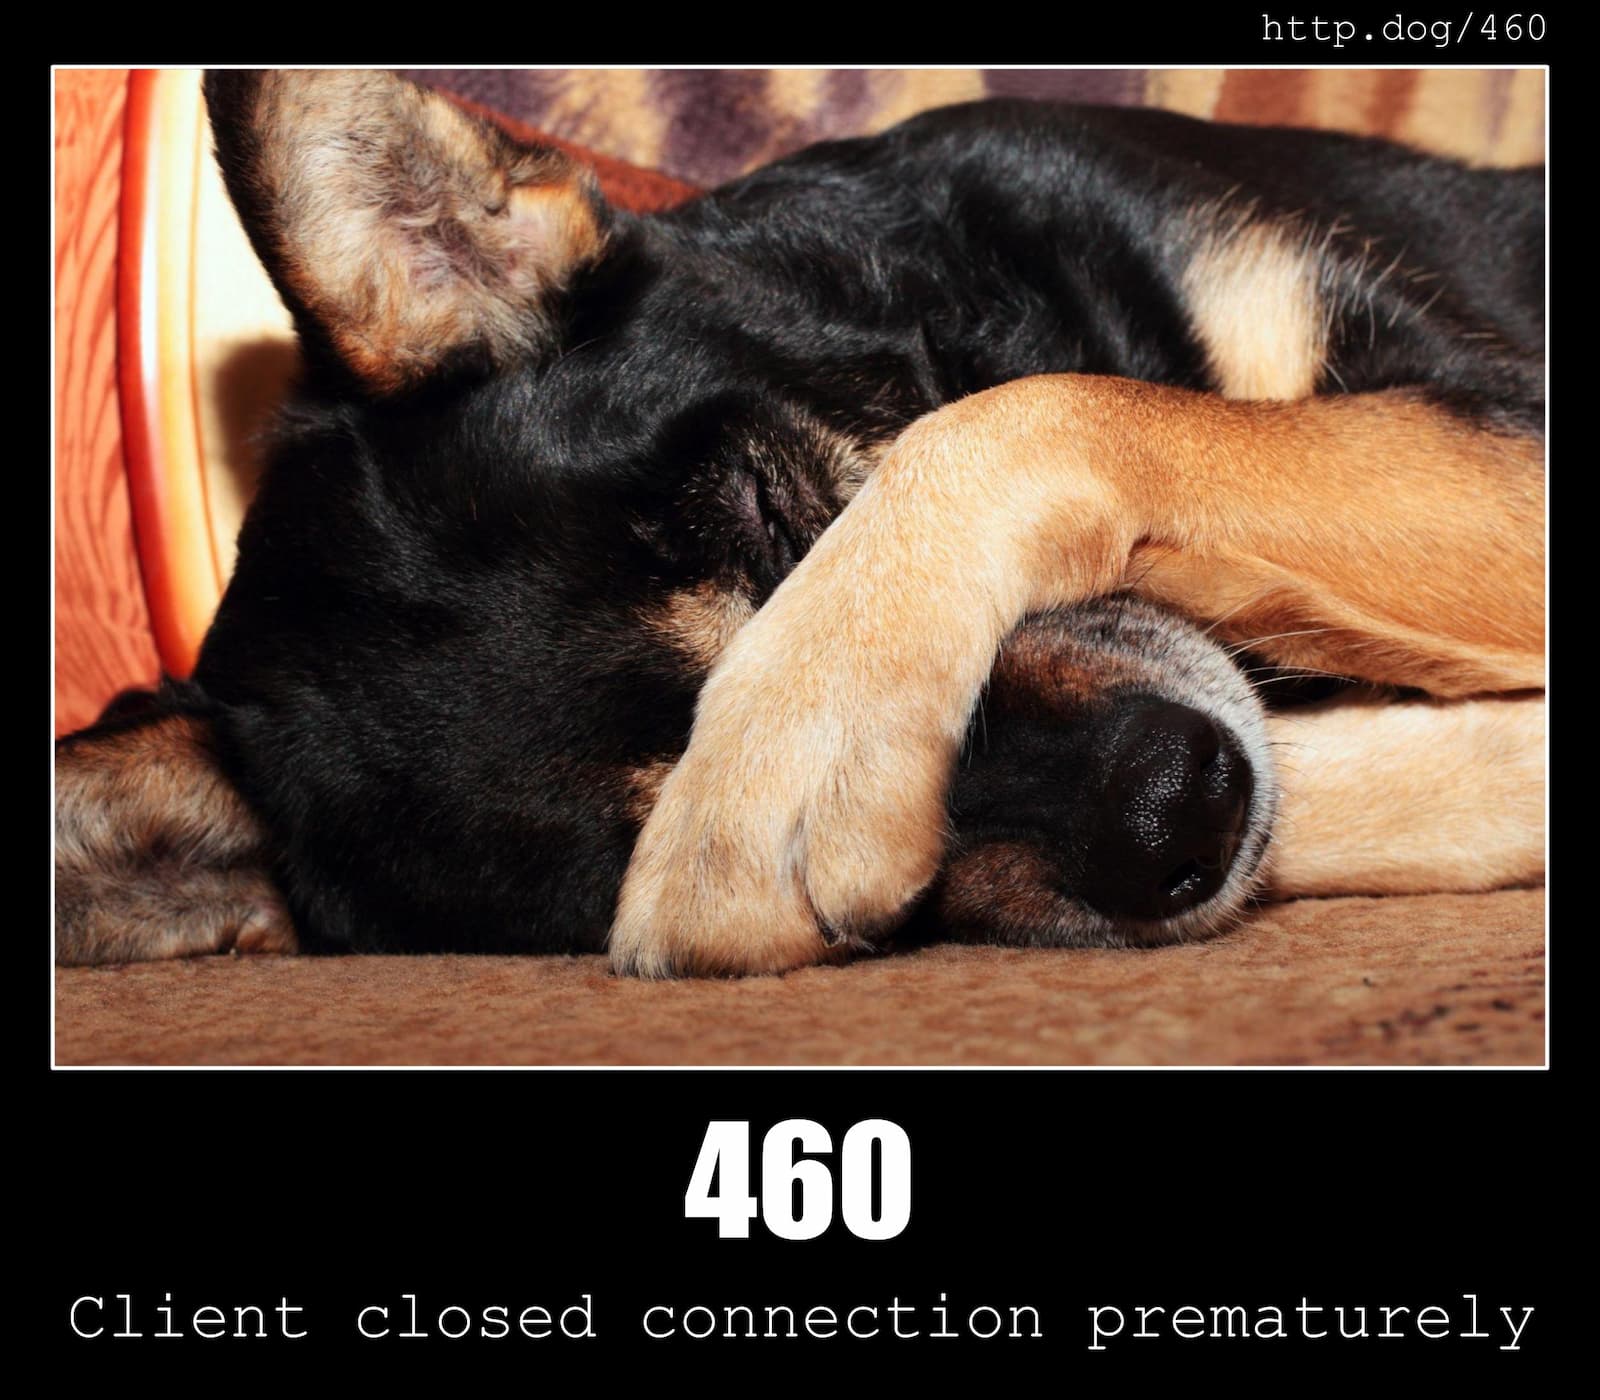 HTTP Status Code 460 Client closed connection prematurely & Dogs